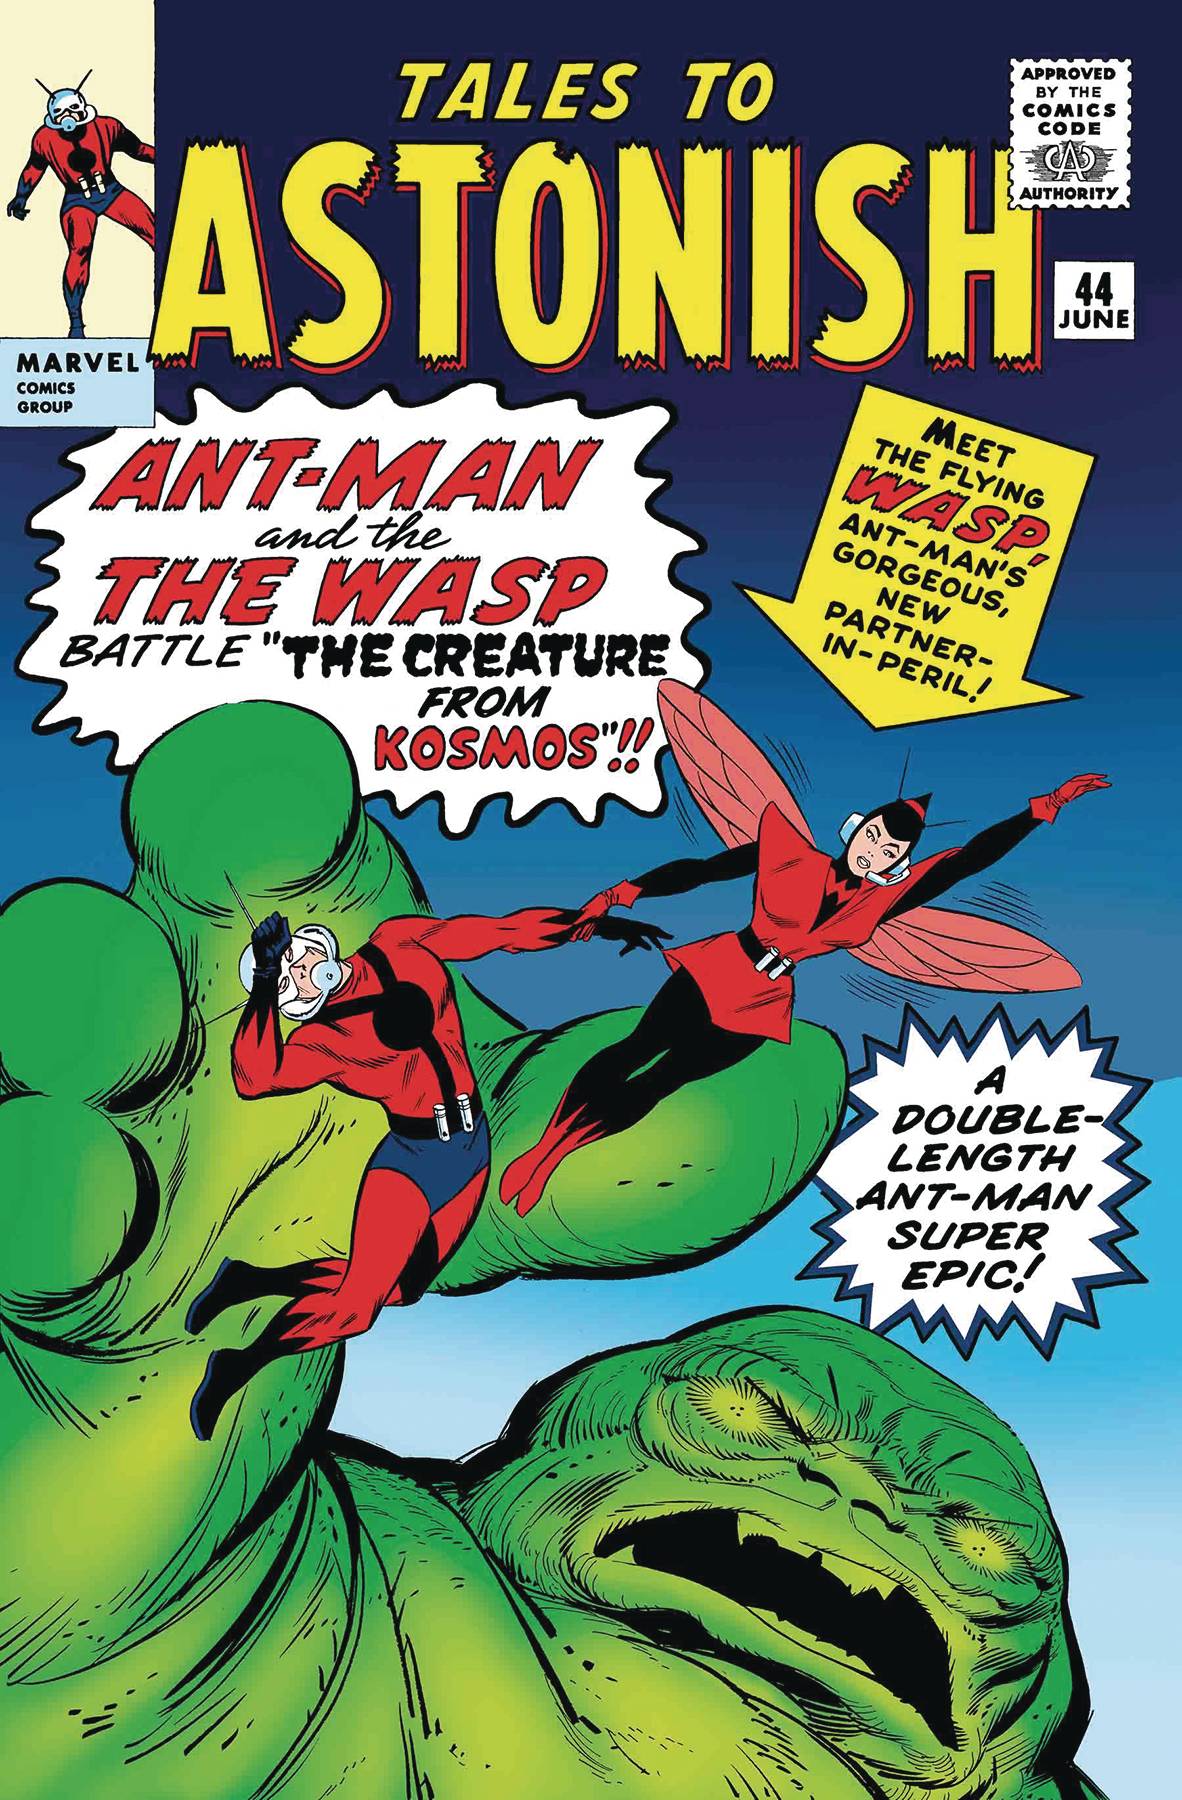 TRUE BELIEVERS: KIRBY 100TH--ANTMAN AND THE WASP#1